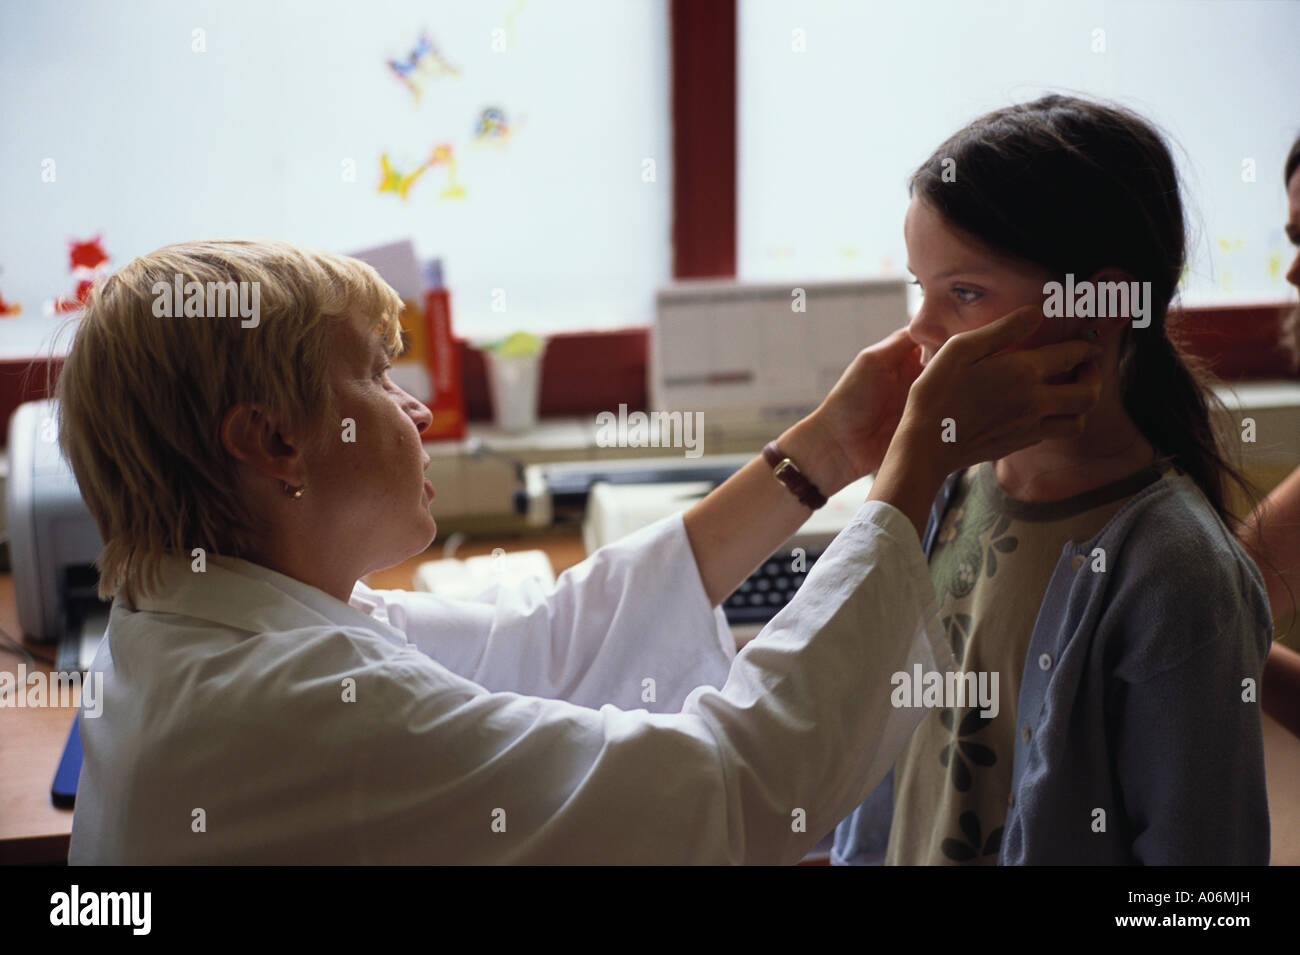 Woman Doctor examines nine year old girl for skin condition prague Czech Republic Stock Photo